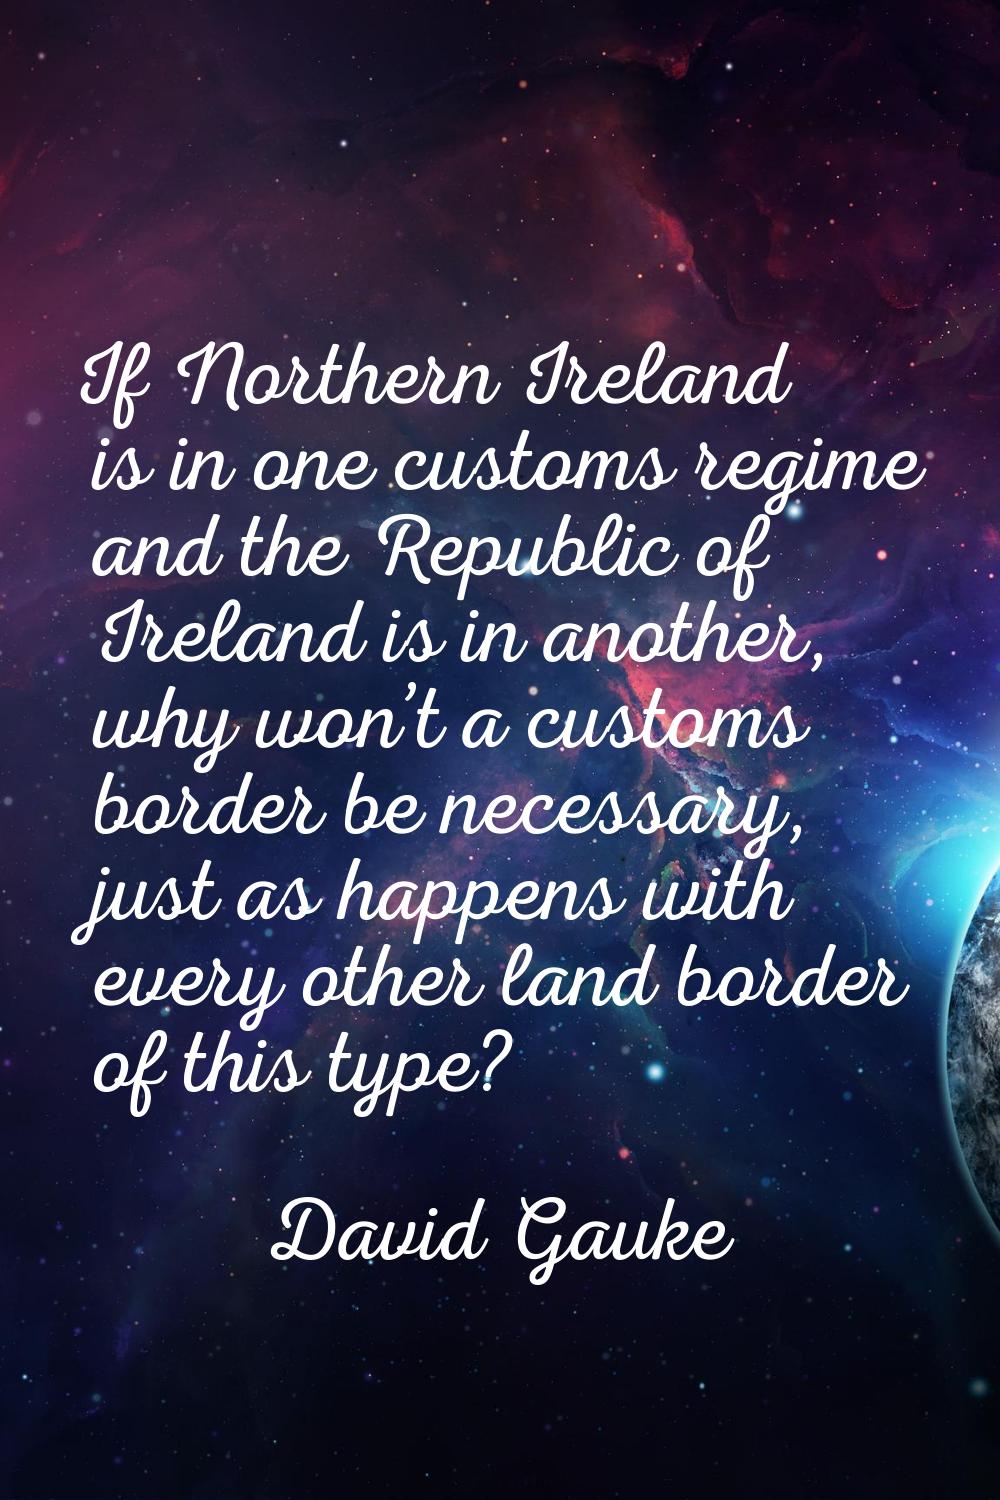 If Northern Ireland is in one customs regime and the Republic of Ireland is in another, why won’t a